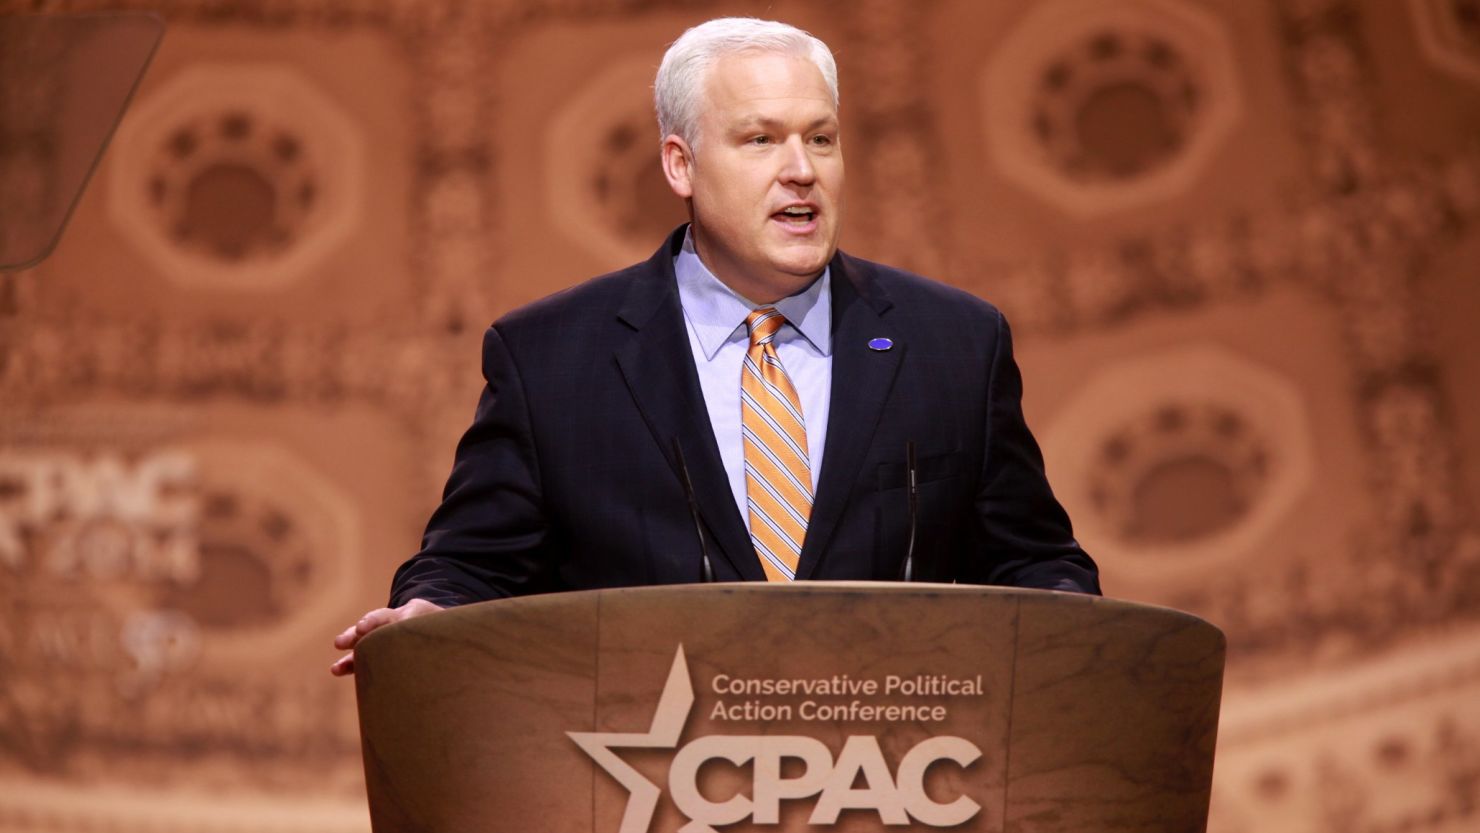 Matt Schlapp speaks at the 2014 Conservative Political Action Conference (CPAC) in National Harbor, Maryland.